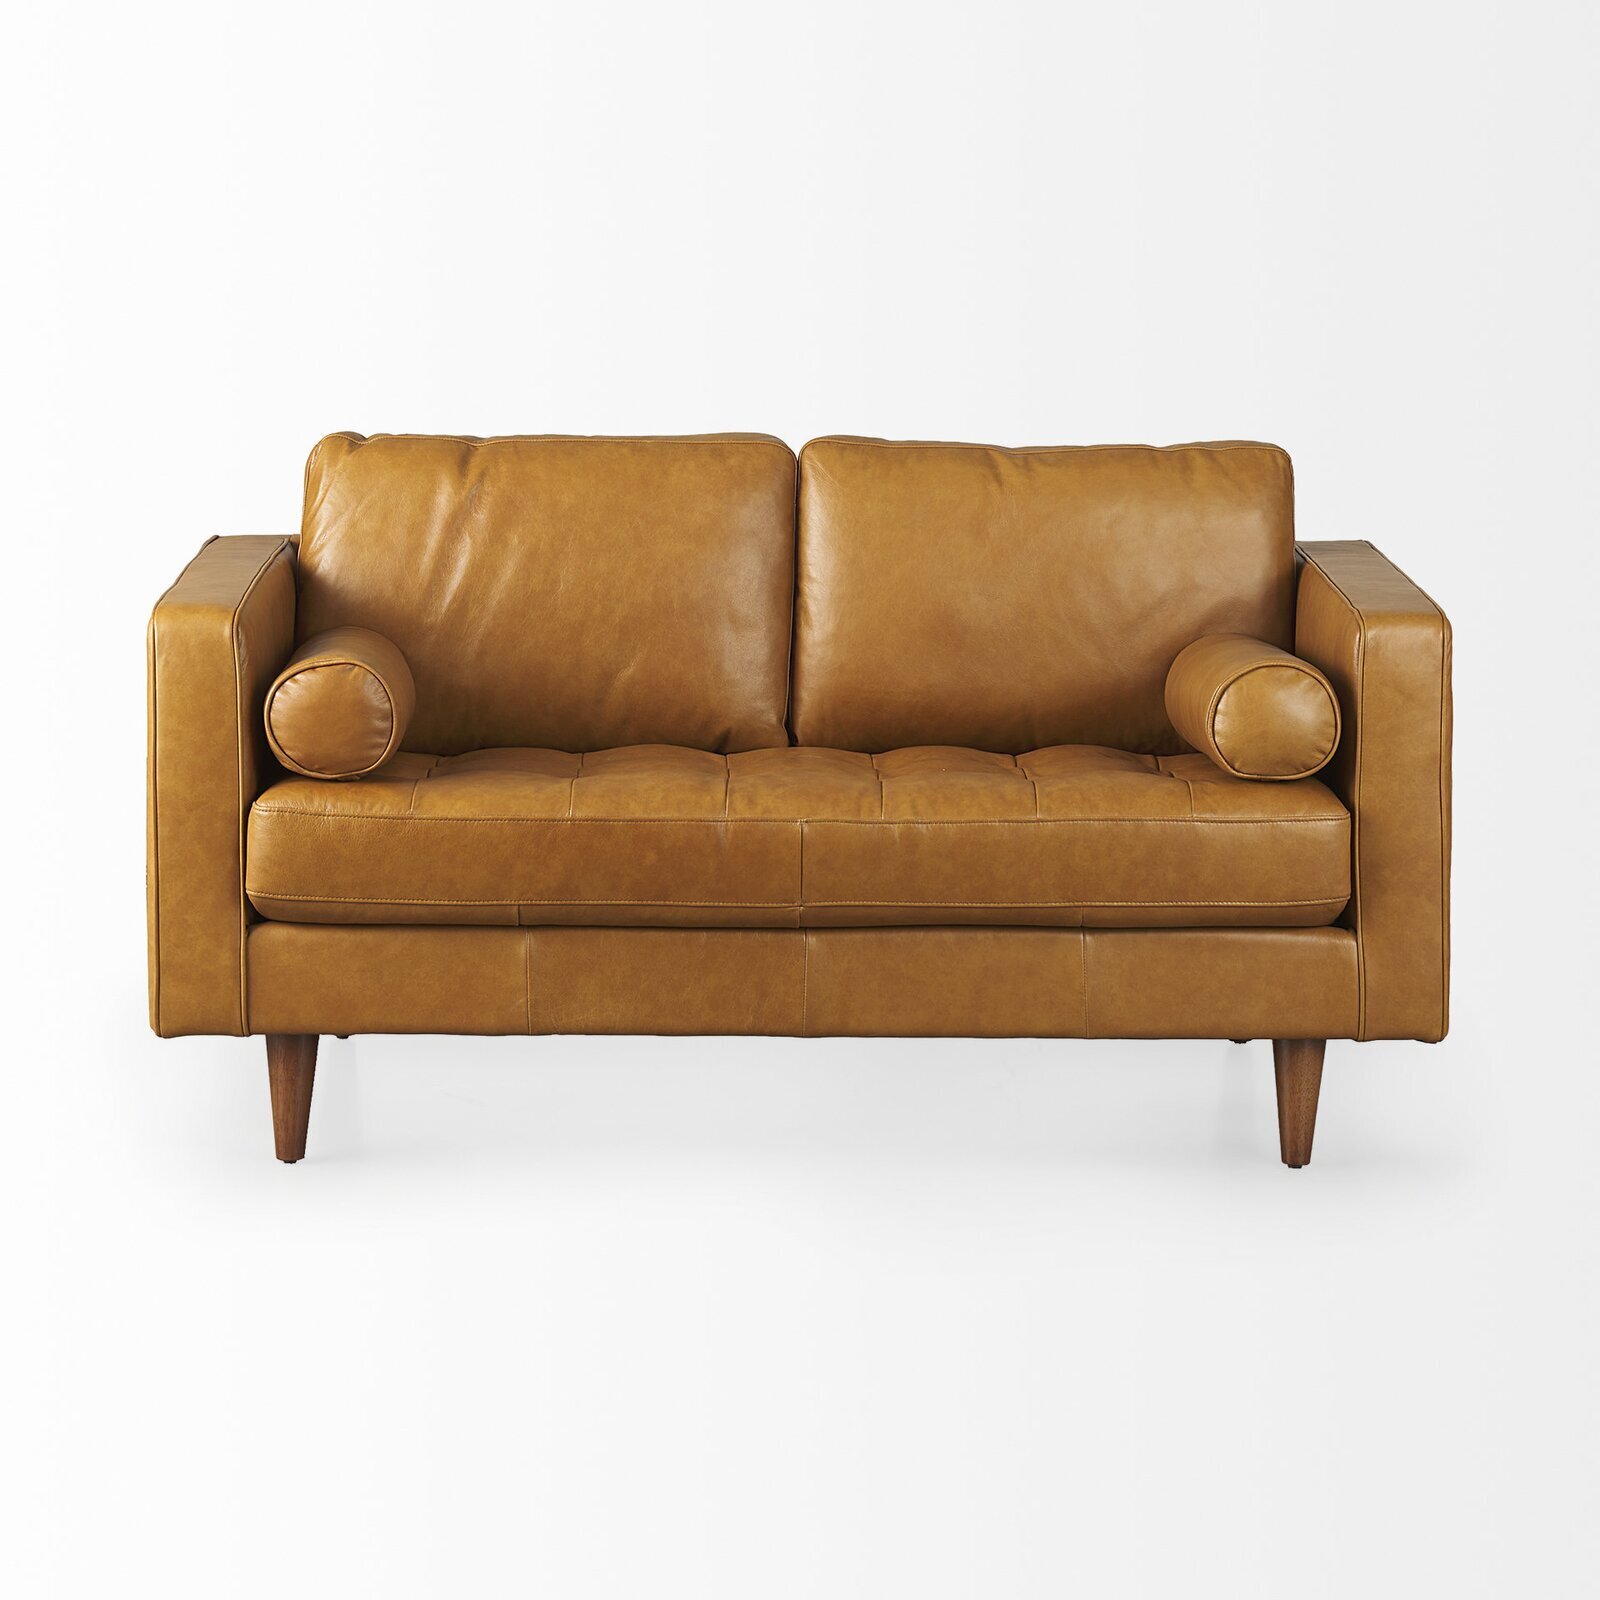 Camel leather sofa for 2